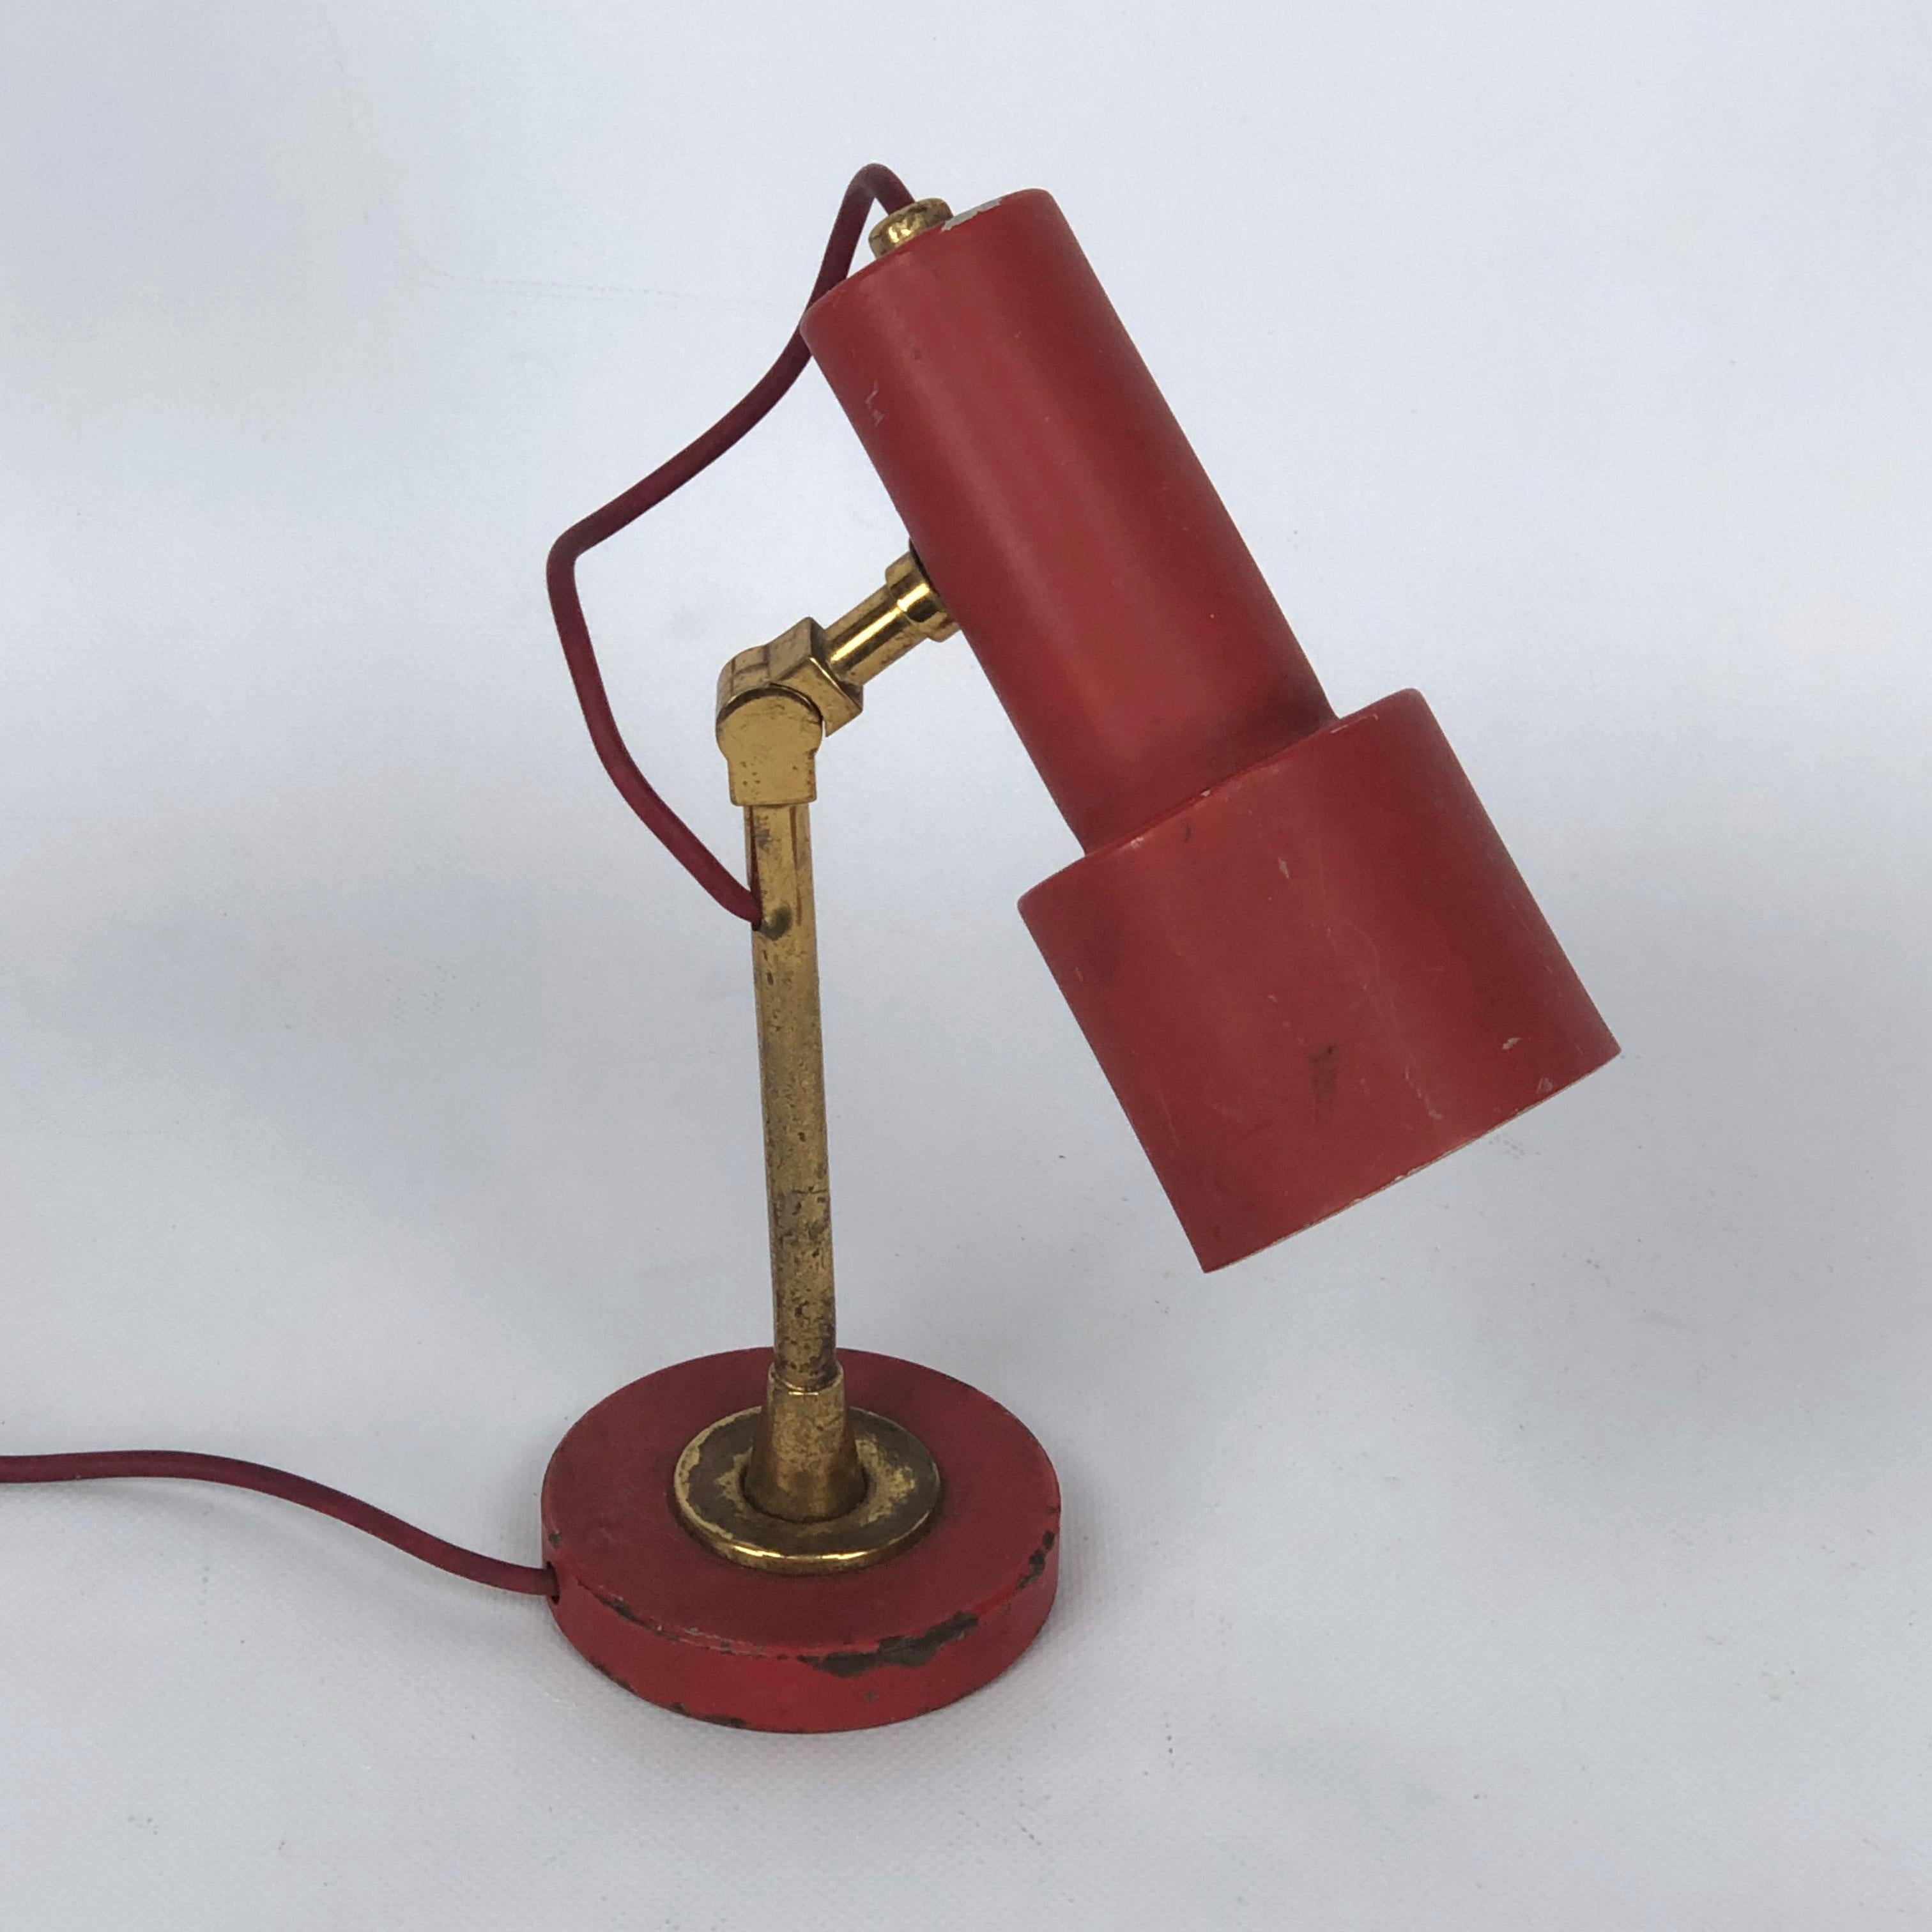 Original vintage condition with evident trace of age and use for this Italian table lamp produced by Stilnovo during the 50s. Full working with EU standard, adaptable on demand for USA standard.
